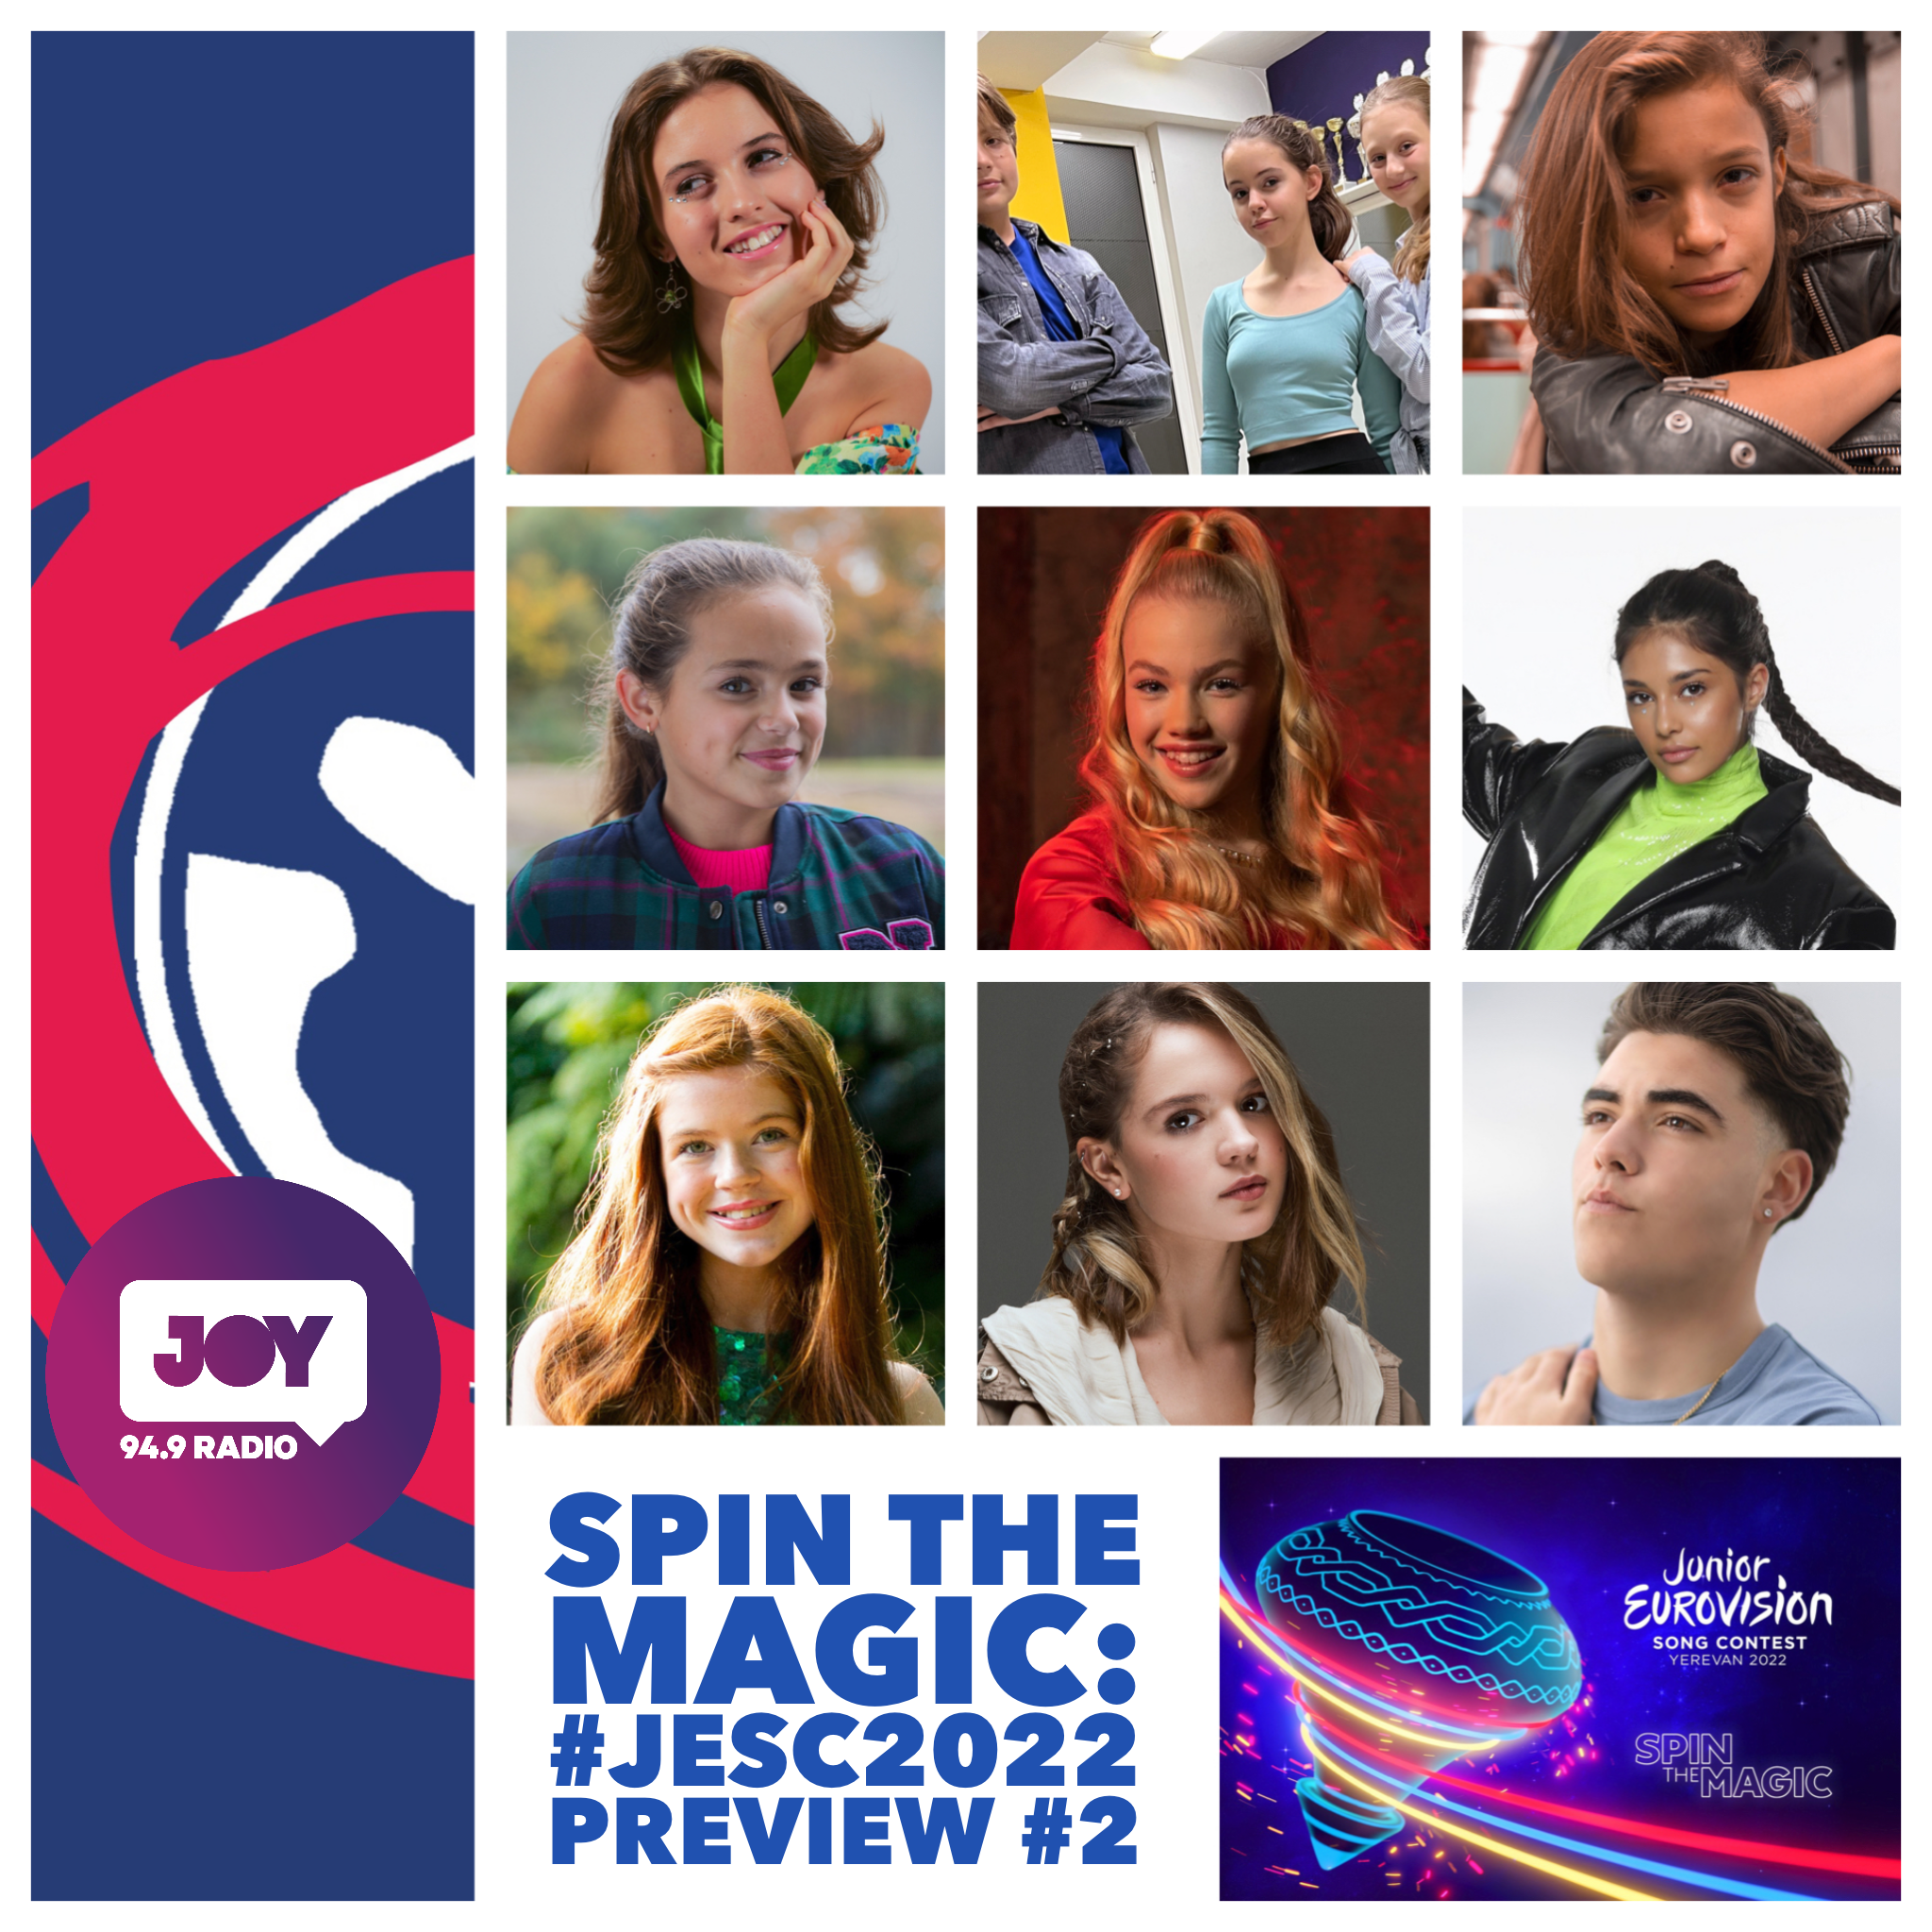 Three hundred and seven – Magic the second preview of the 2022 Junior Eurovision Song Contest